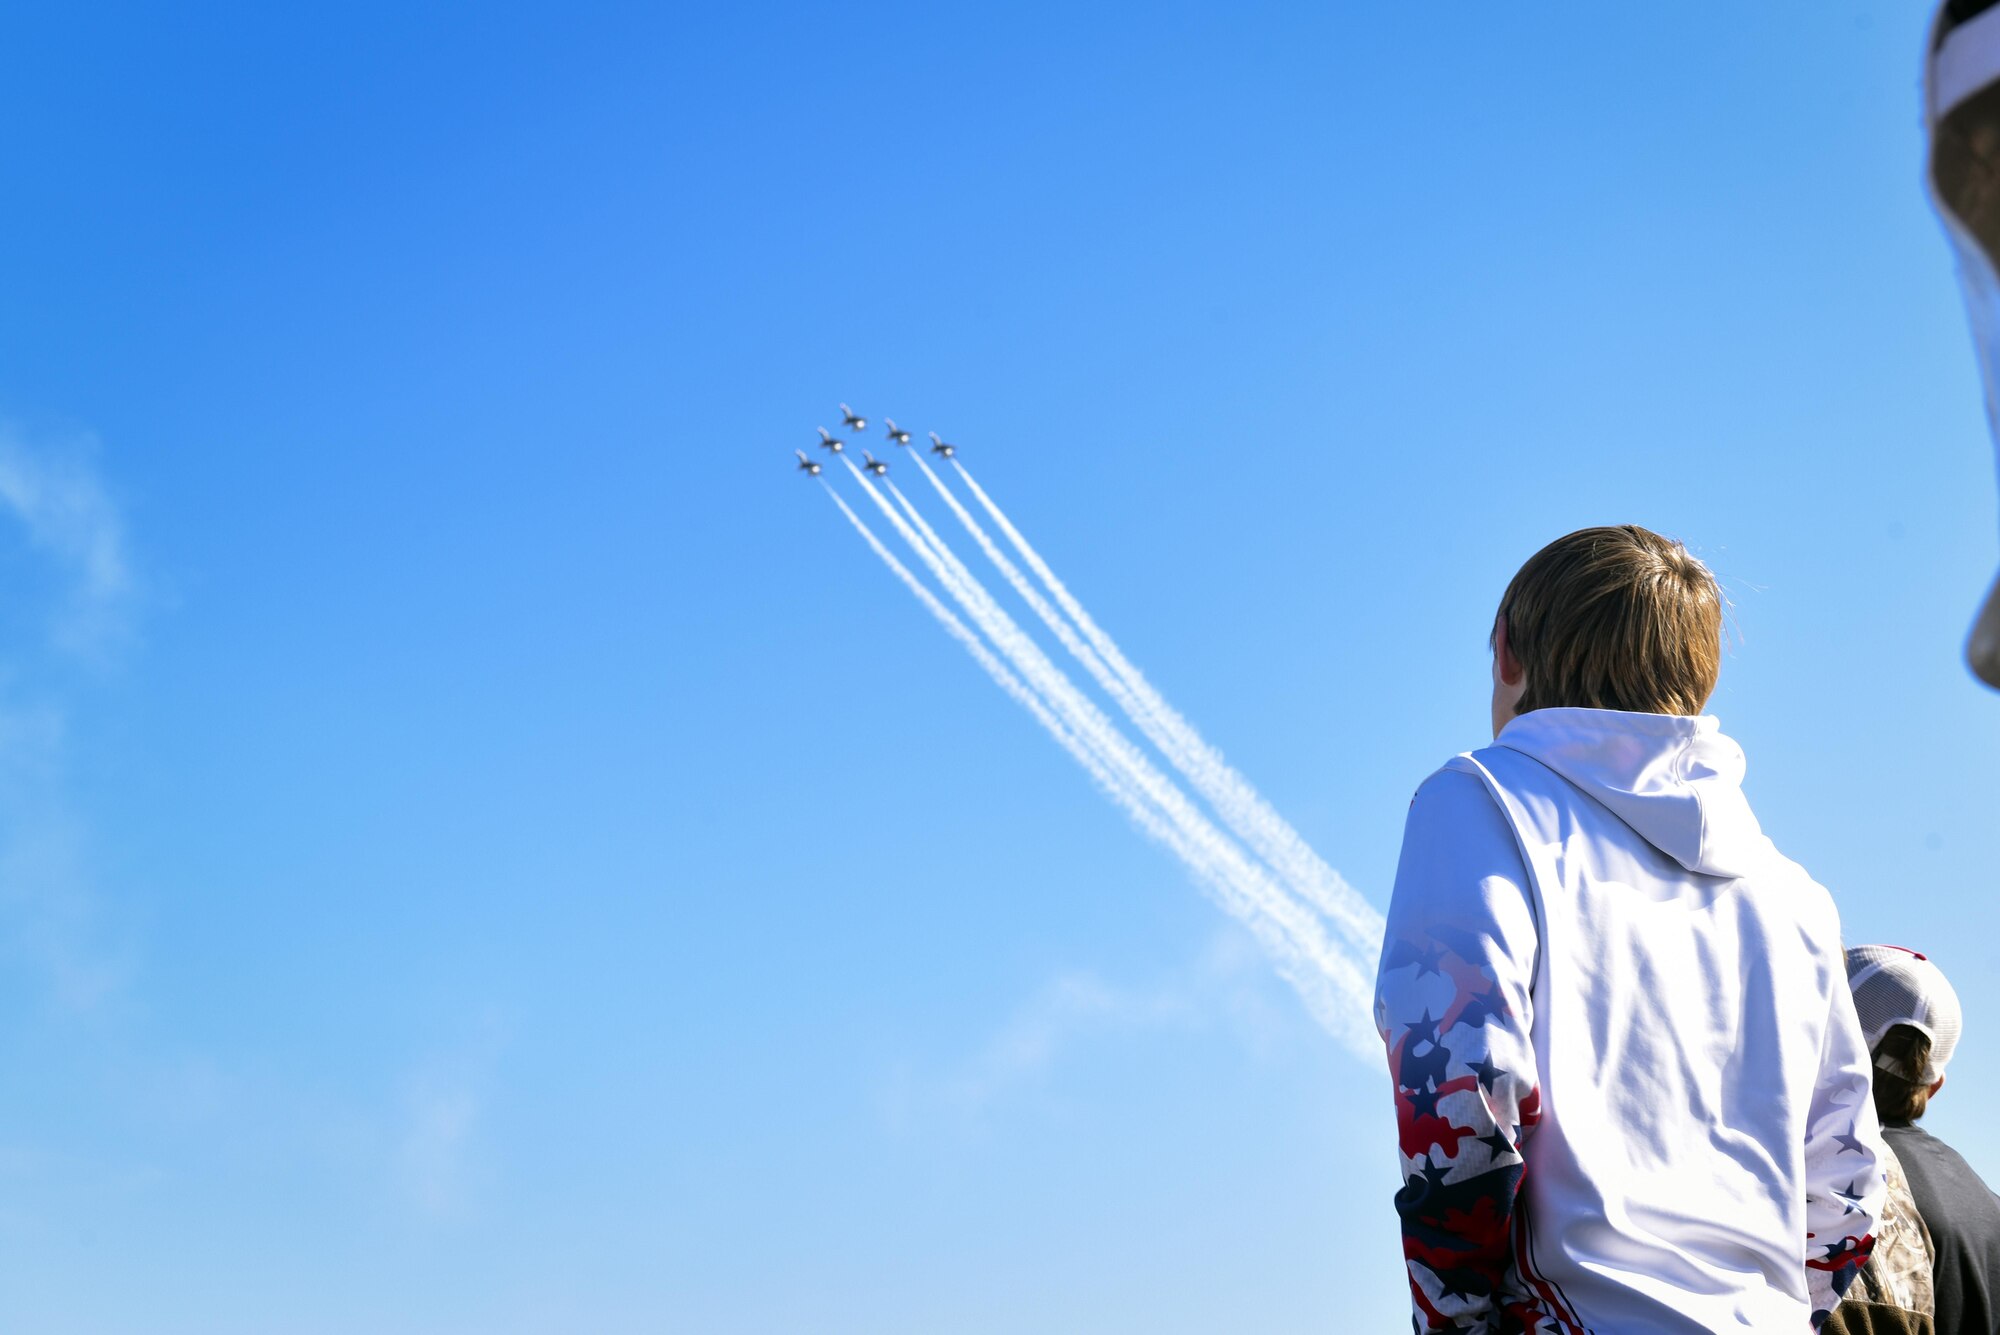 A spectator looks in awe at a performance executed by The U.S. Air Force Thunderbirds Flight Demonstration Team, Oct. 29, 2017, at Moody Air Force Base, Ga. Moody opened its gates to the public for a free, two-day event as a way to thank the local community for their ongoing support of the base’s mission. (U.S. Air Force photo by Senior Airman Greg Nash)